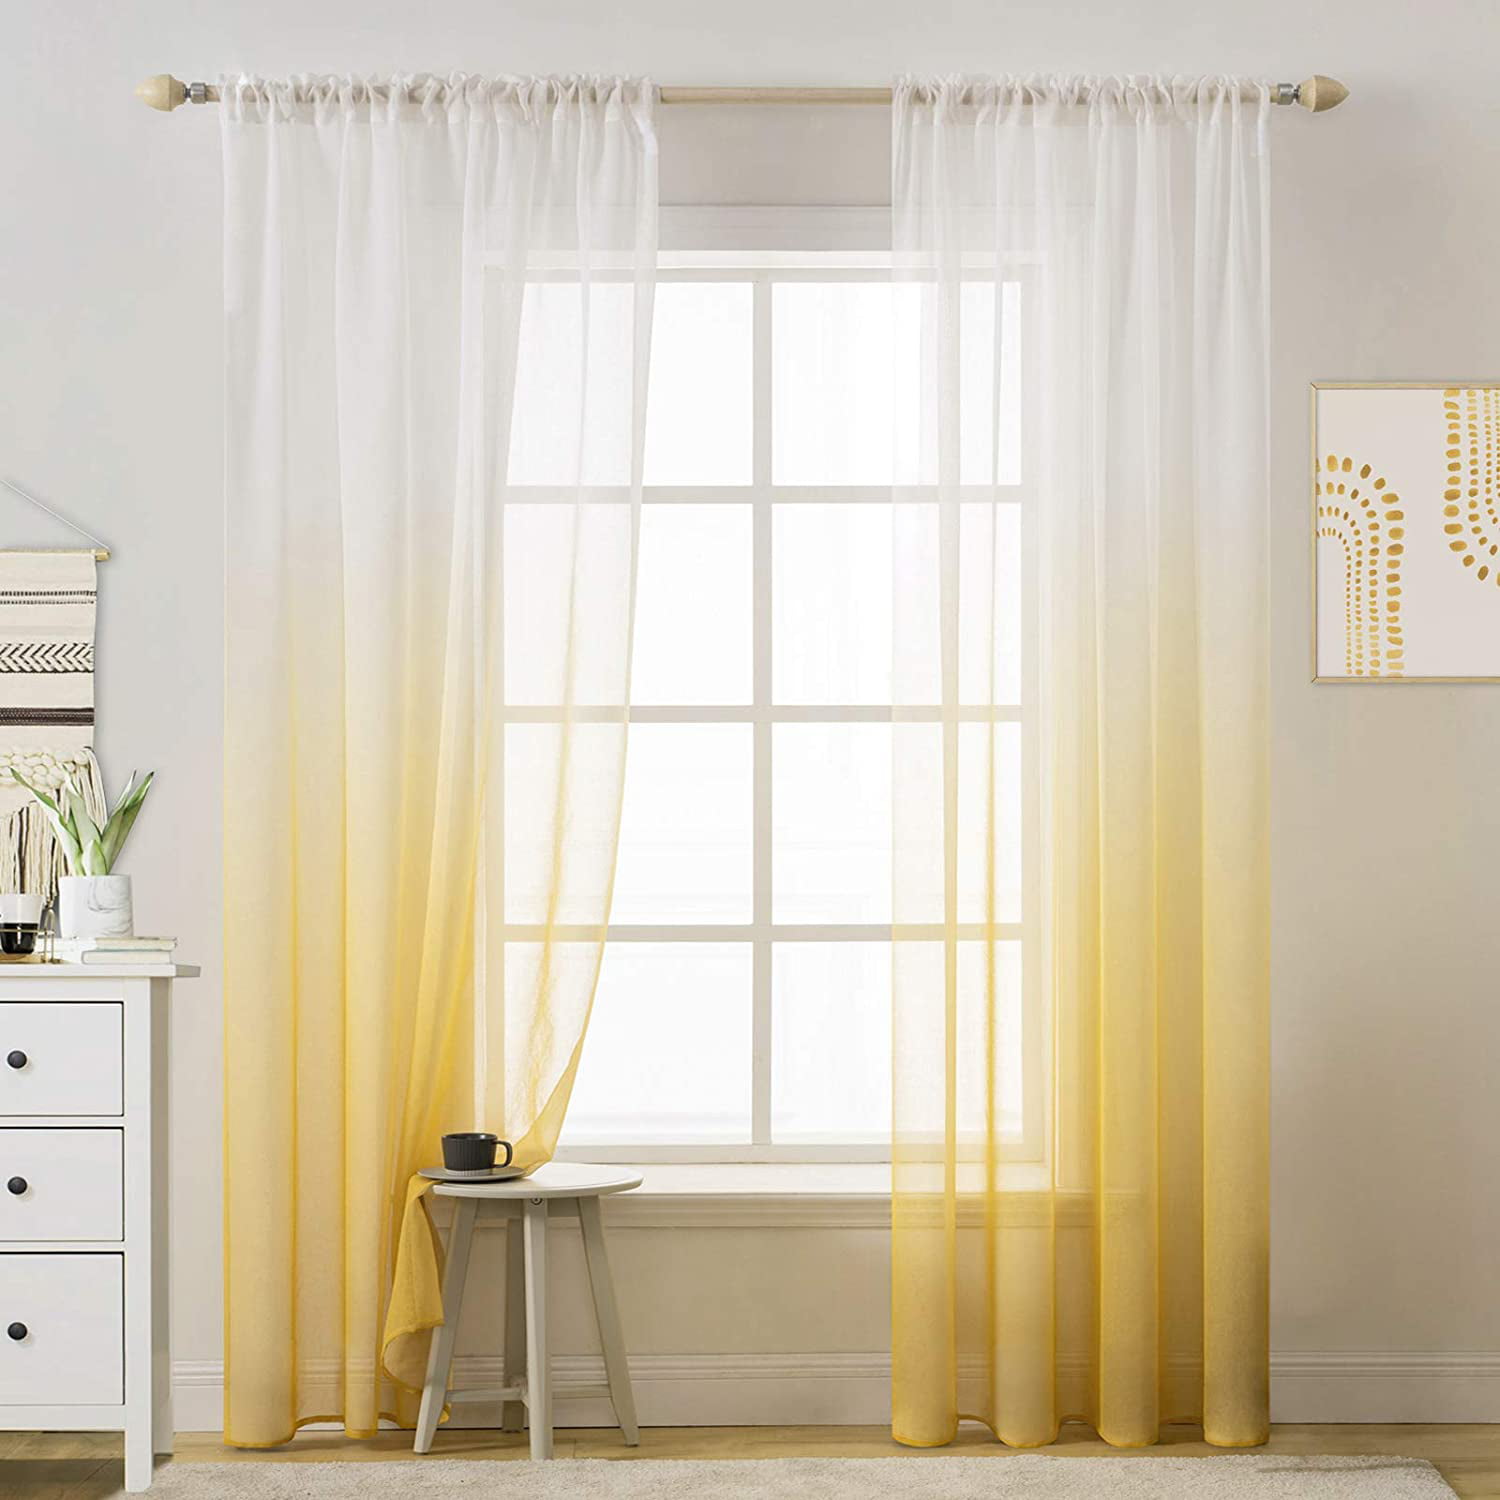 SET OF 2 SHEER VOILE TAILORED CURTAINS 90" LONG BRIGHT YELLOW 